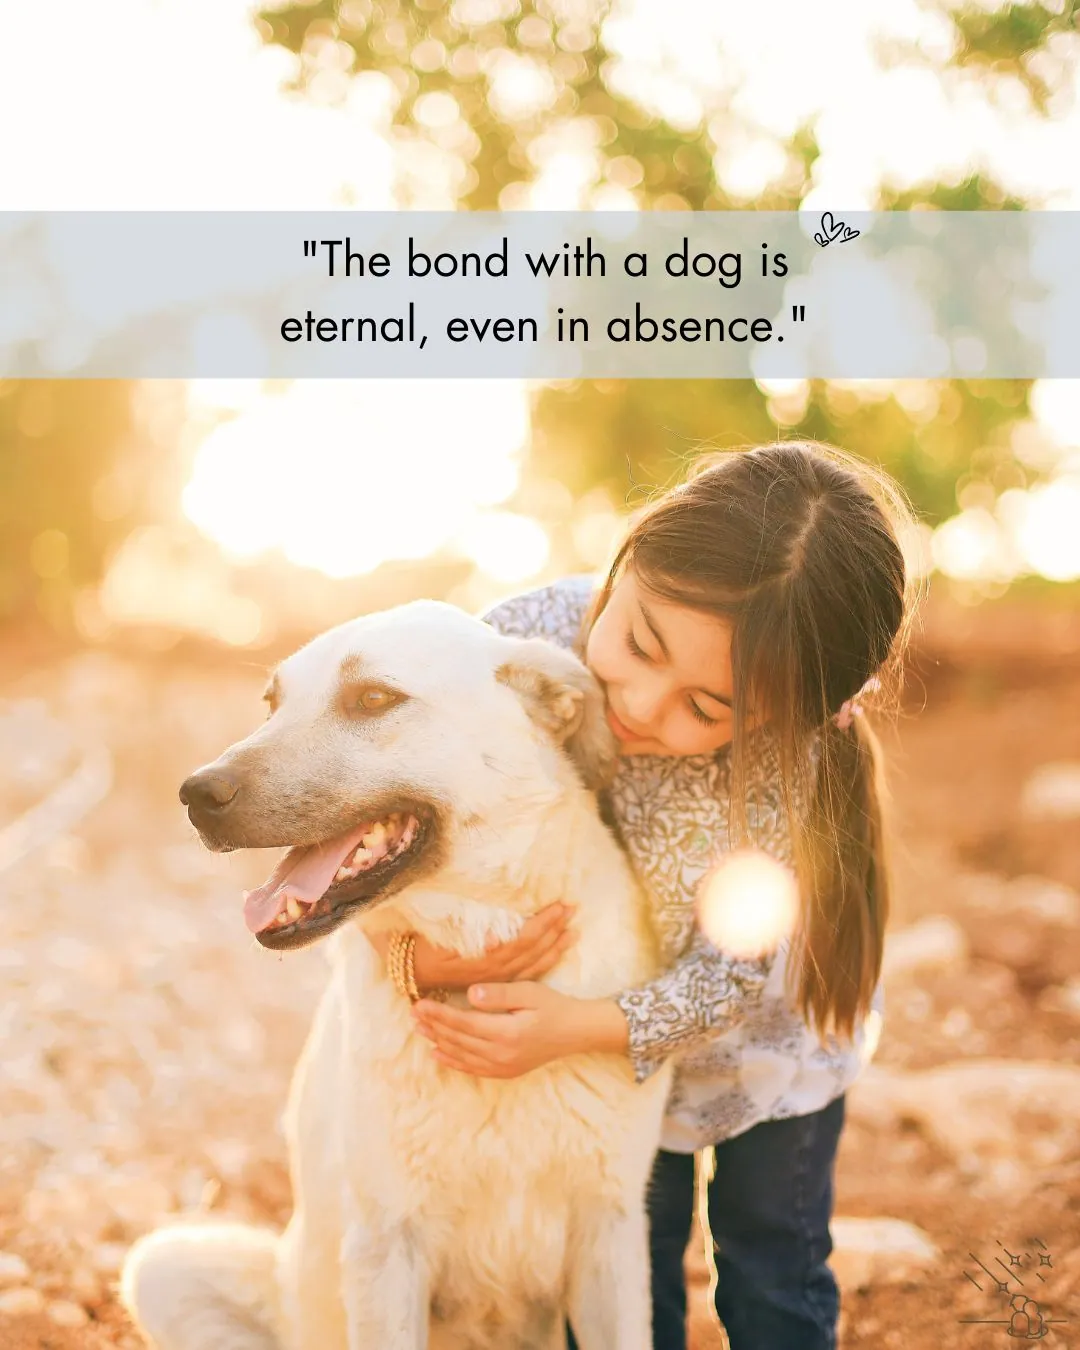 Pet Loss Quotes for Dog Image (1)